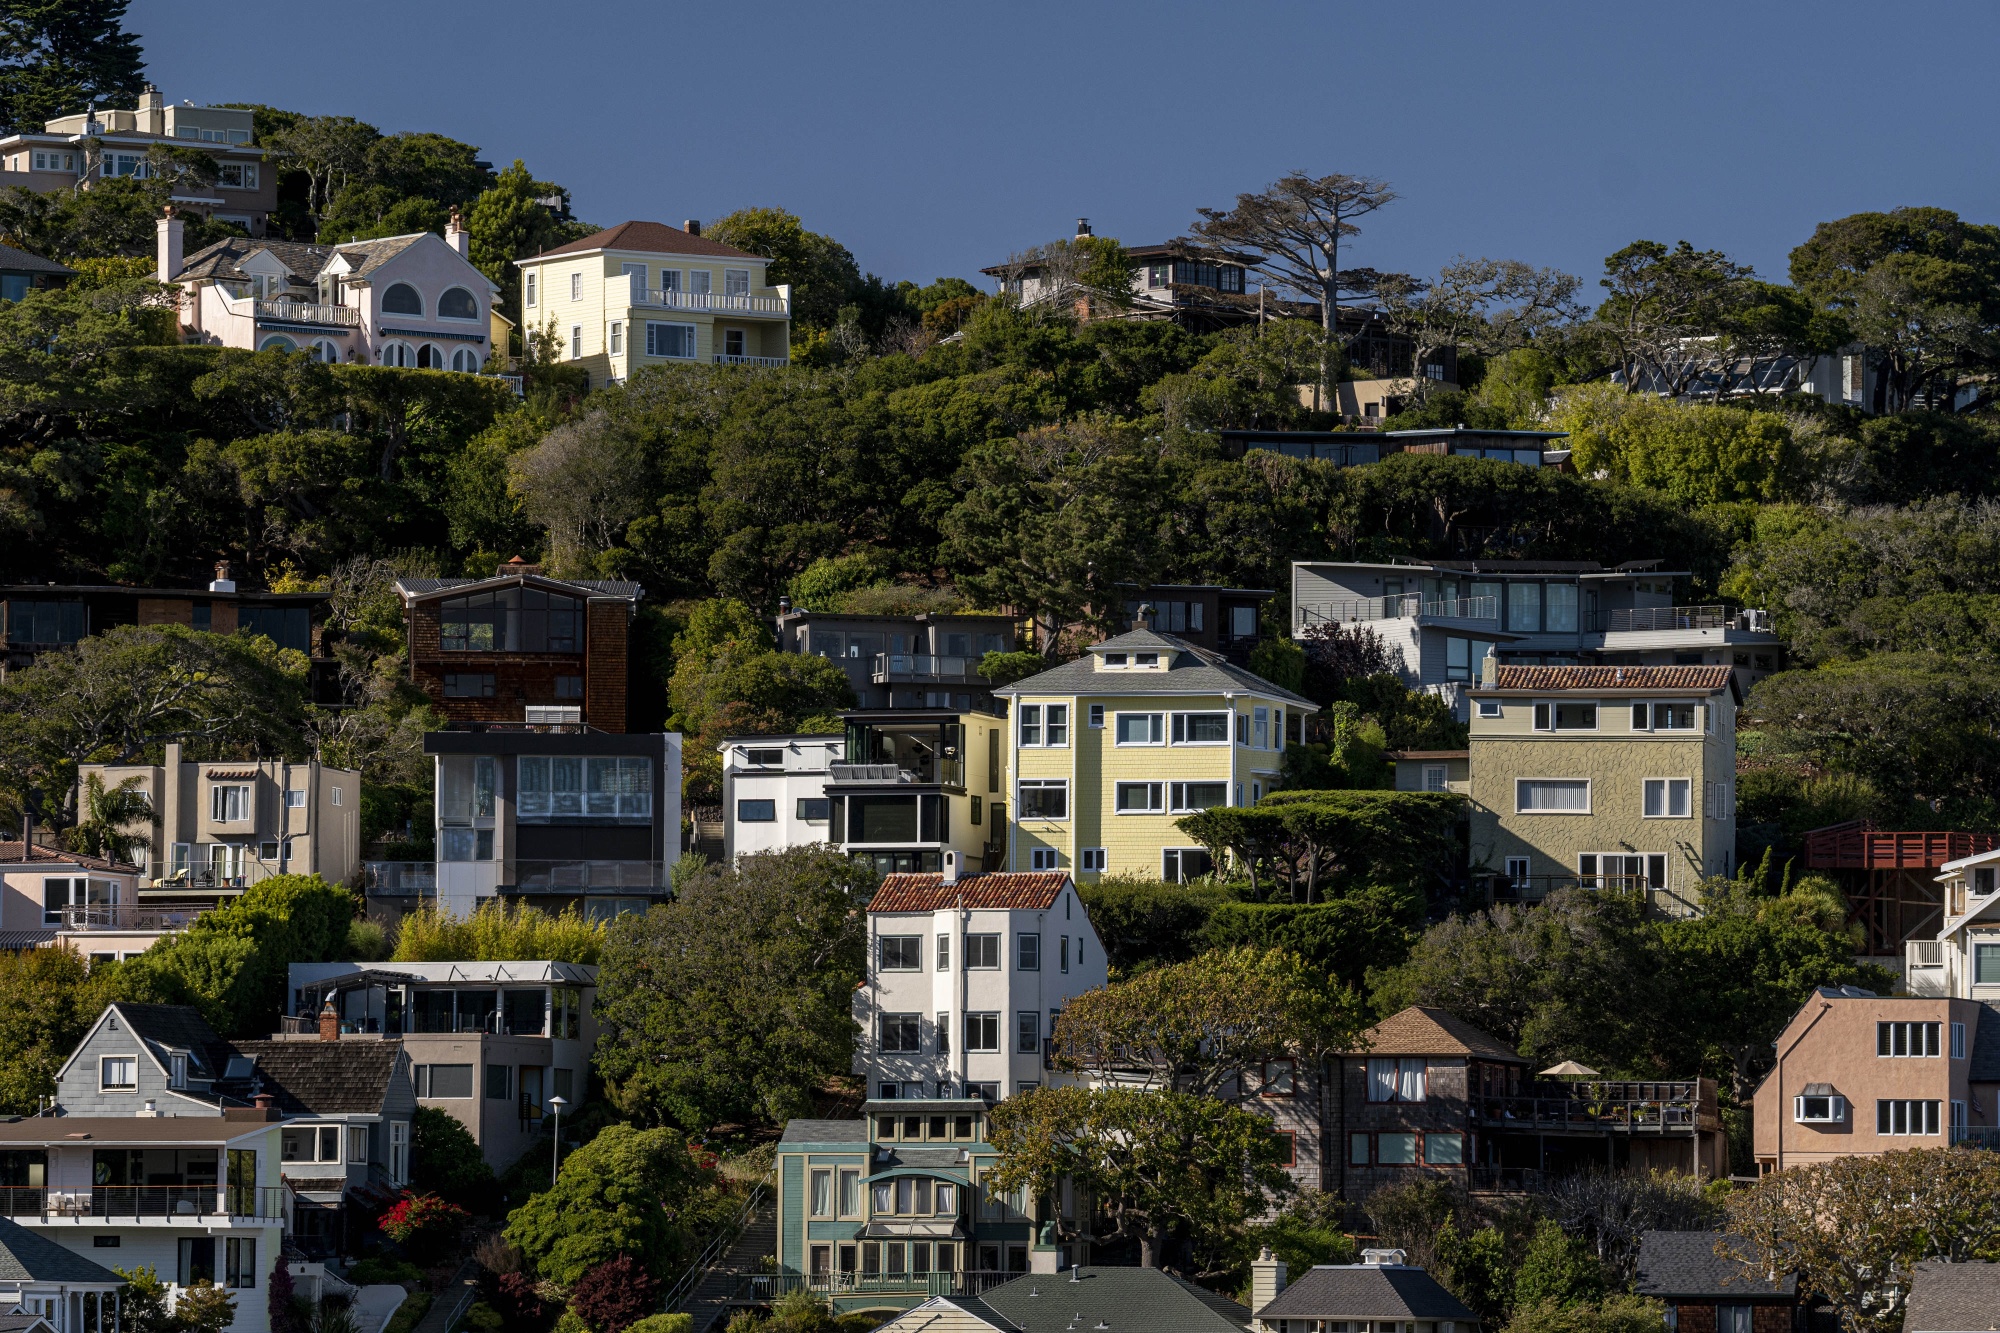 California cities like Sausalito, in&nbsp;Marin County, are struggling to hit their housing construction goals.&nbsp;